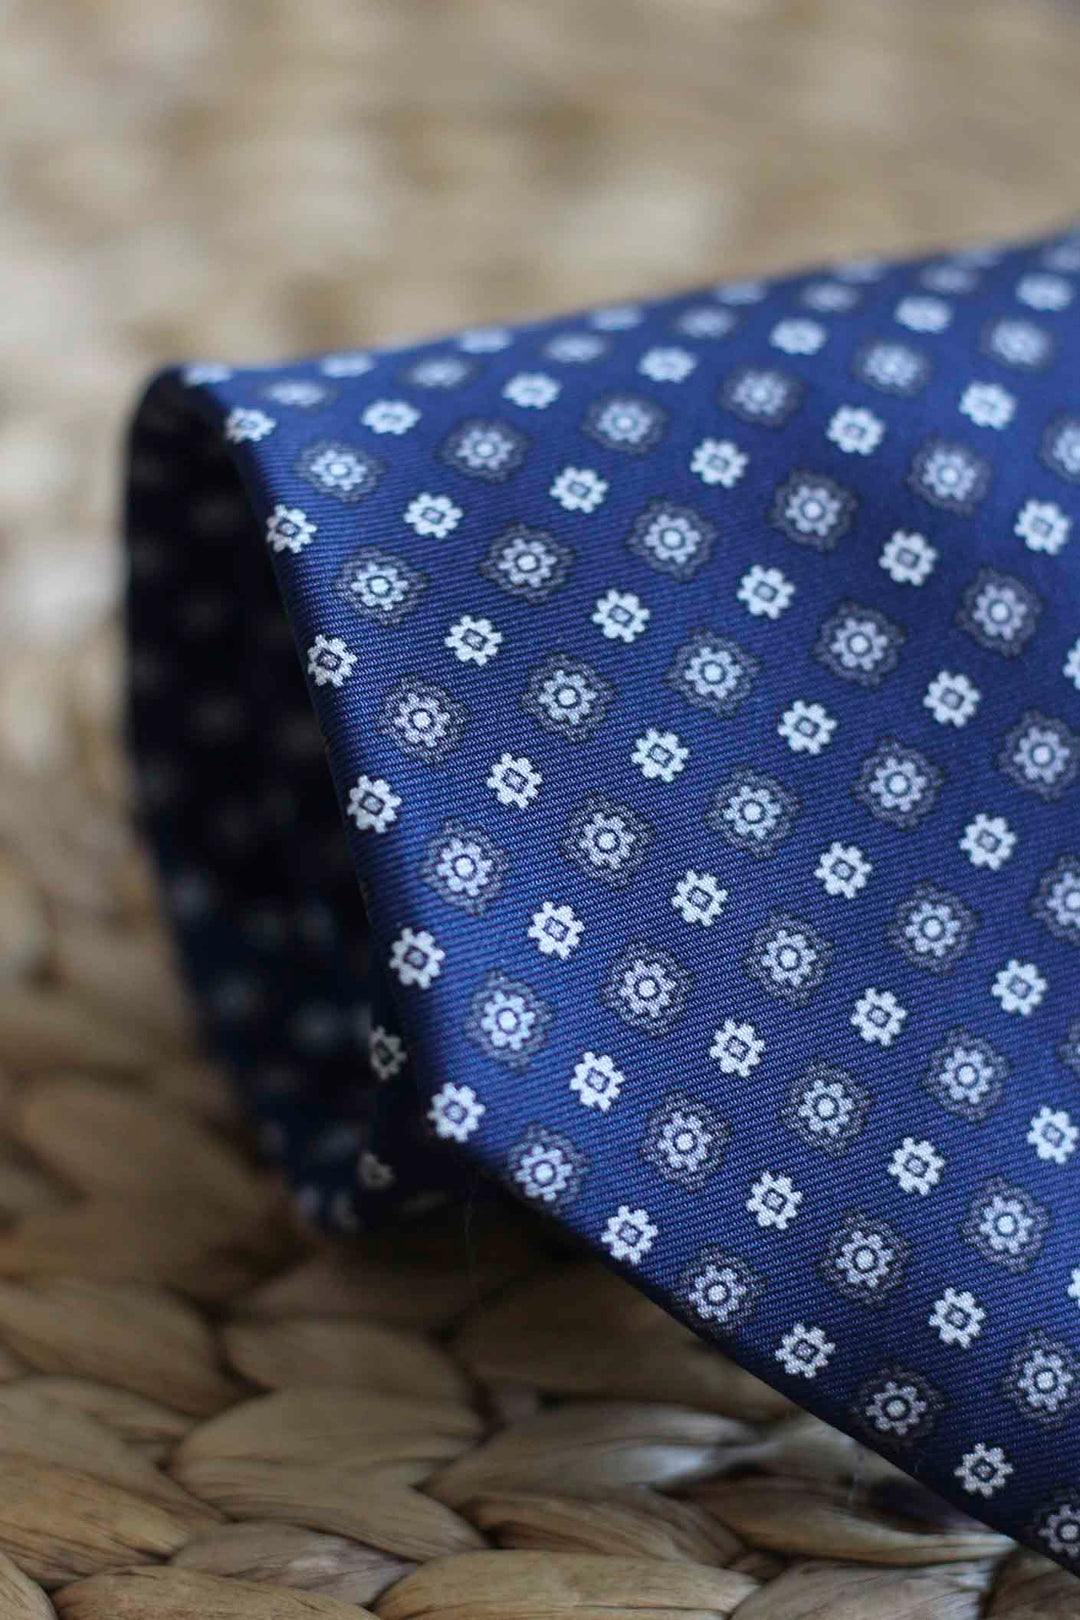 Napoli Blue Silk Tie With daisies in grayish blue and white tones